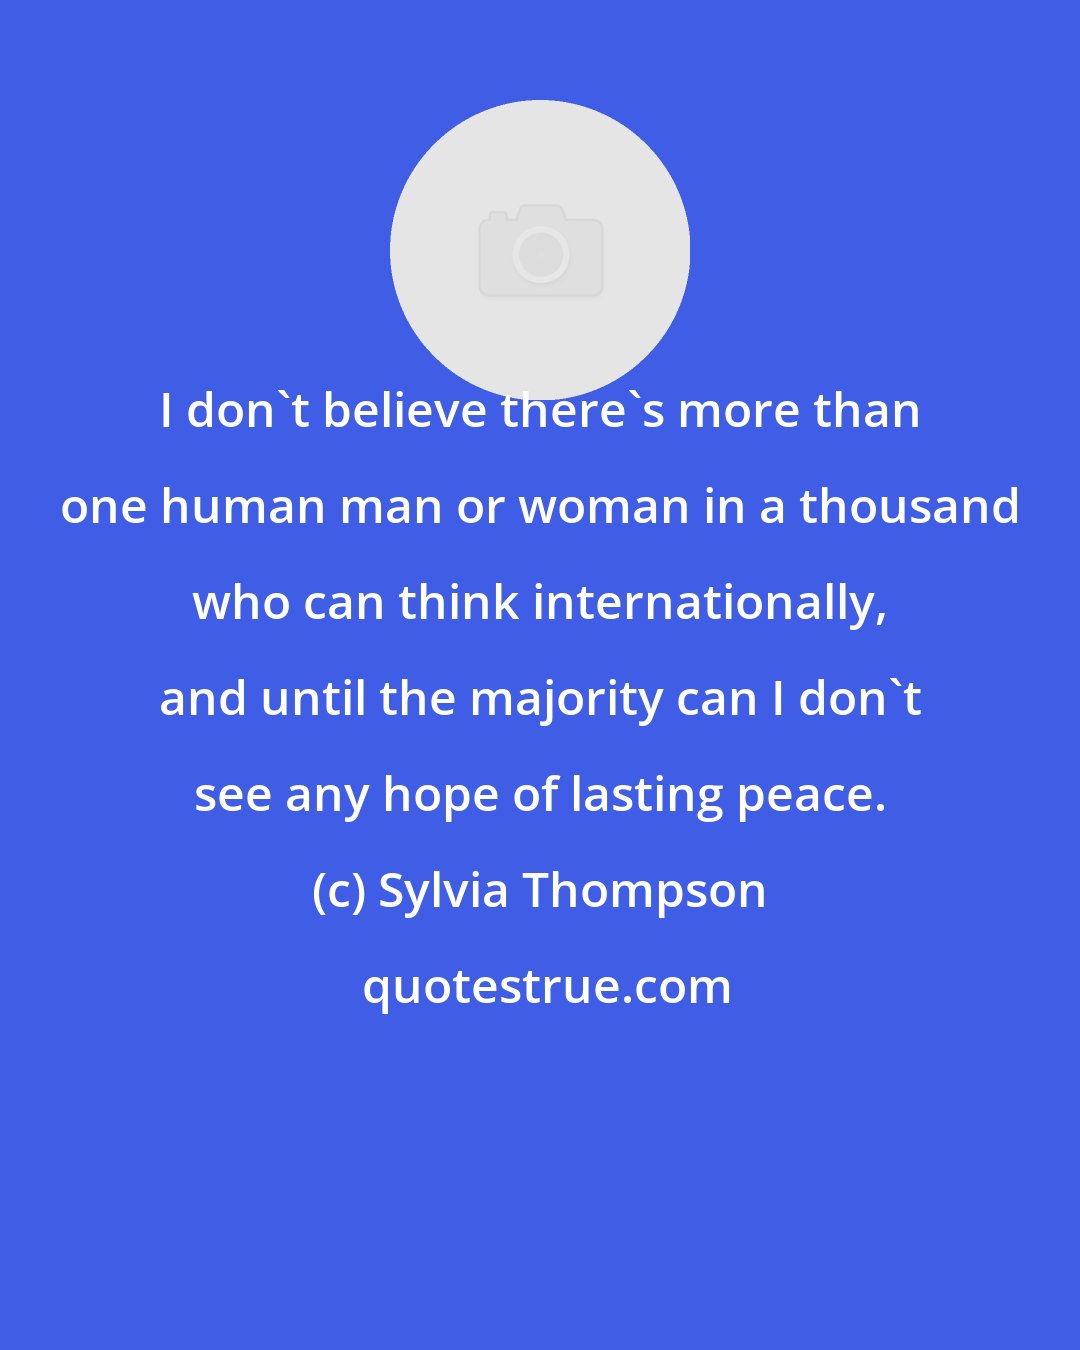 Sylvia Thompson: I don't believe there's more than one human man or woman in a thousand who can think internationally, and until the majority can I don't see any hope of lasting peace.